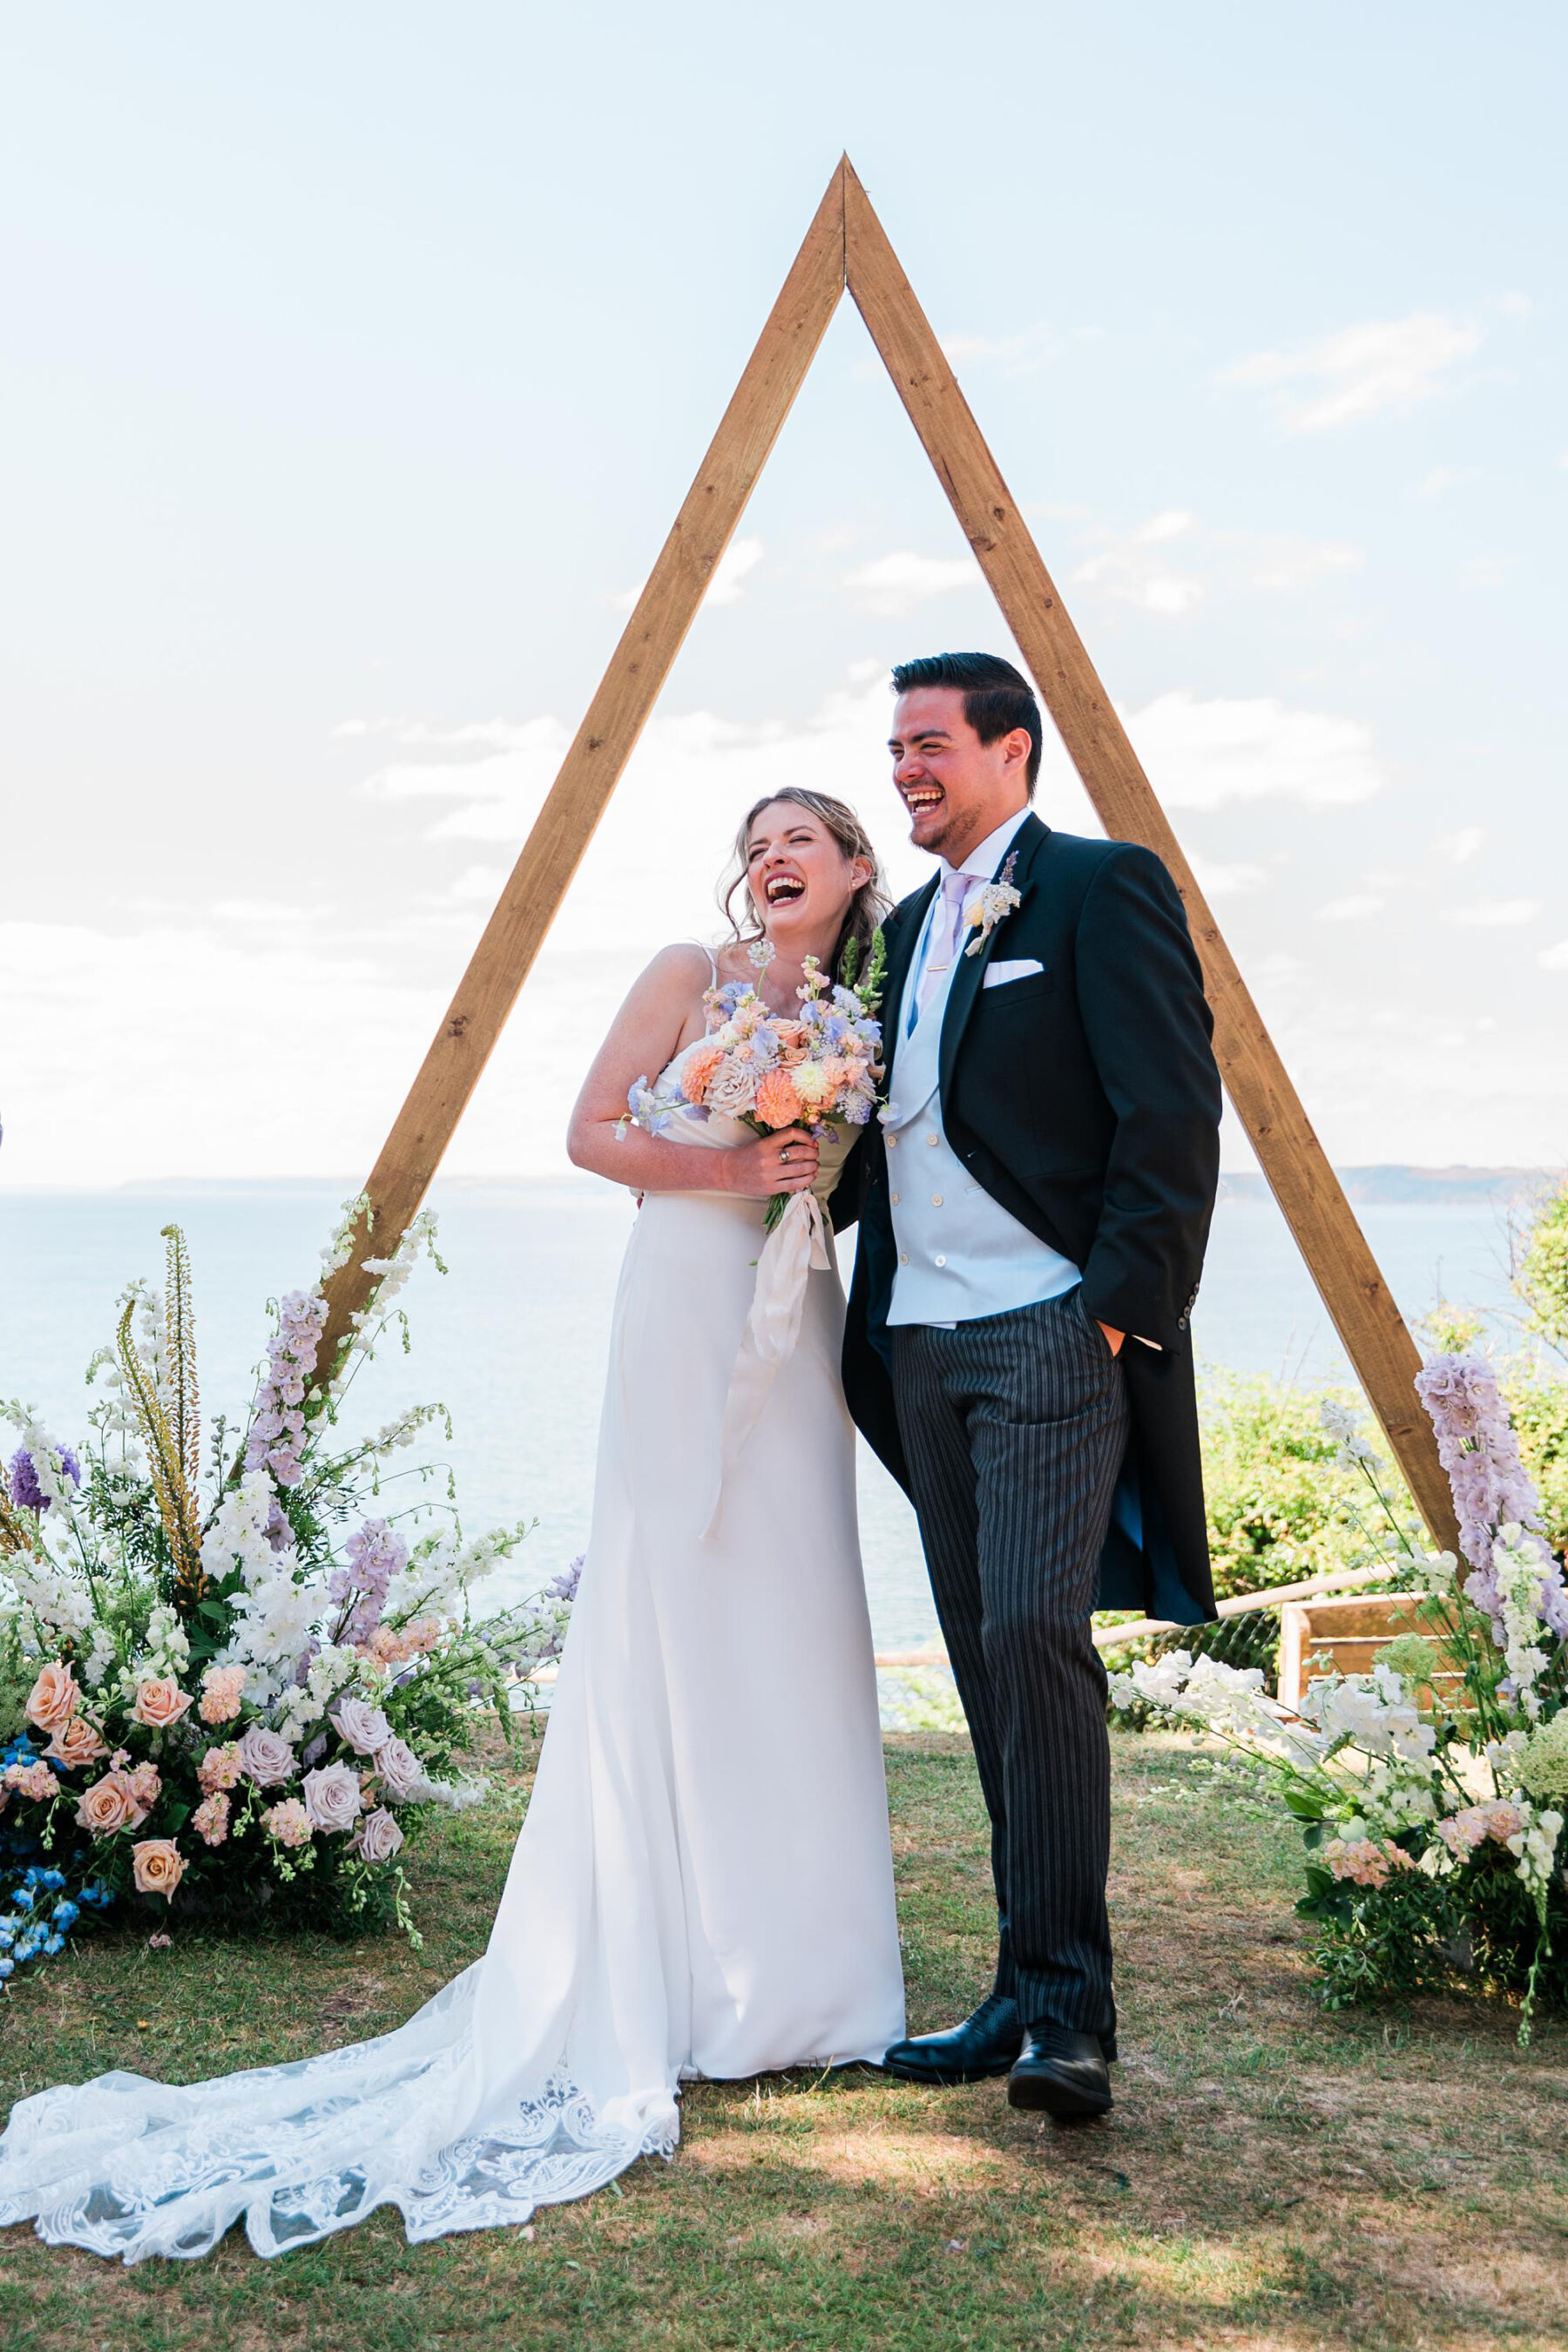 Sea view wedding in Cornwall. Bride and groom stood next to a triangle wooden ceremony backdrop with summer flowers at it's base.